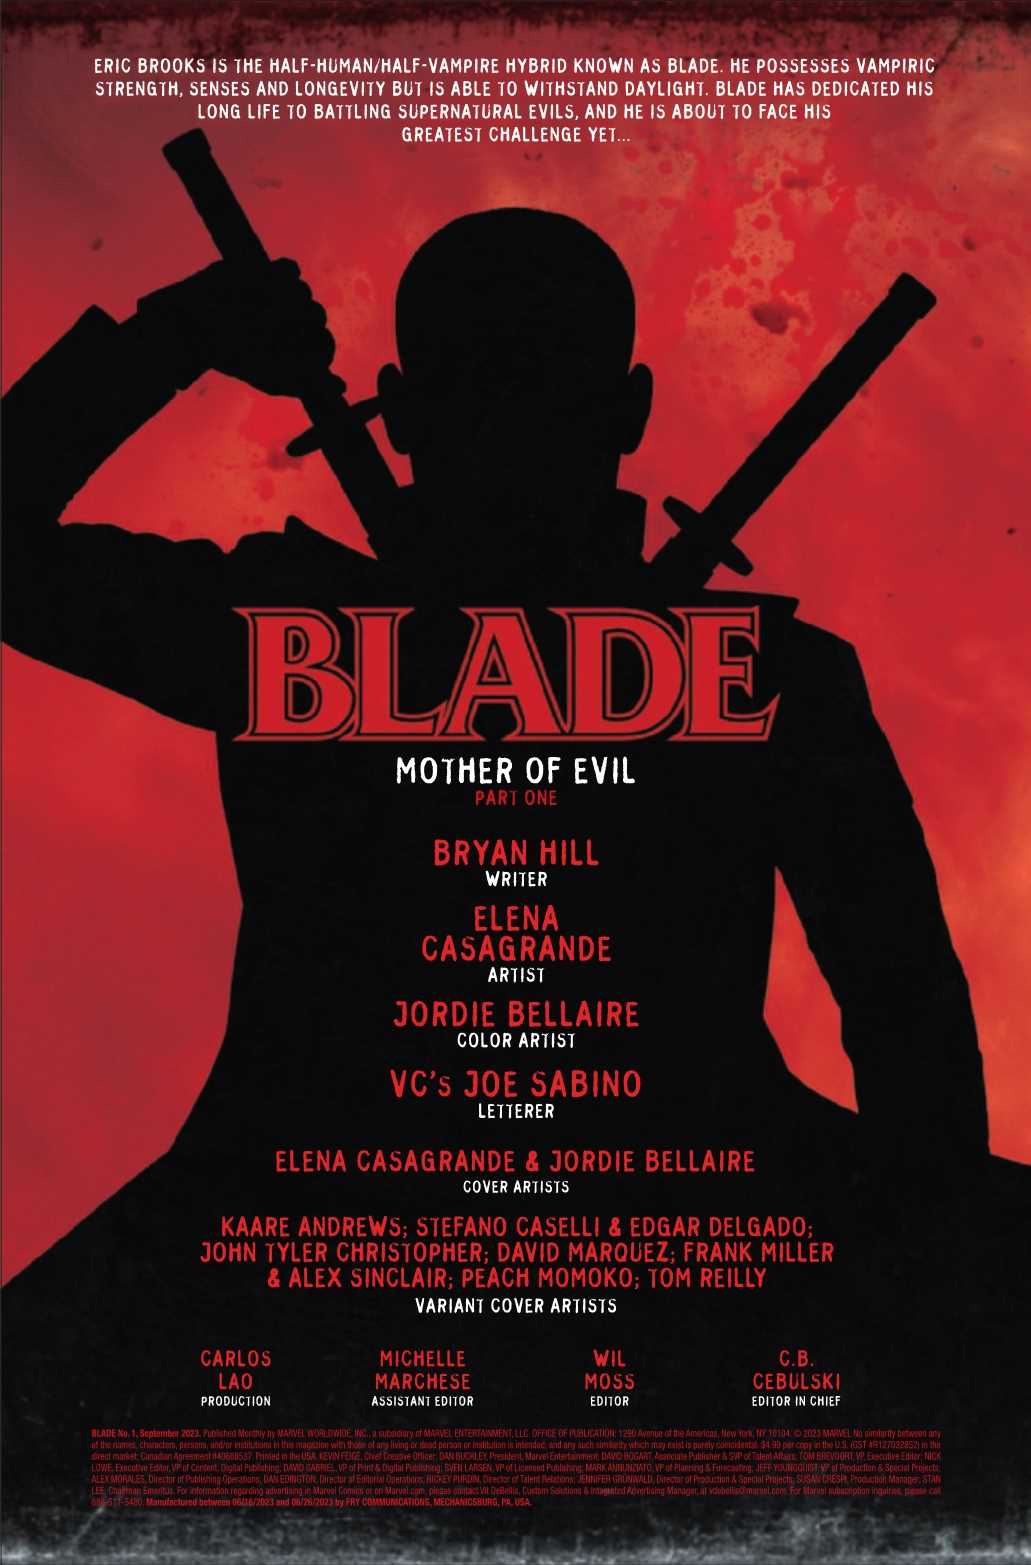 BLADE from Marvel